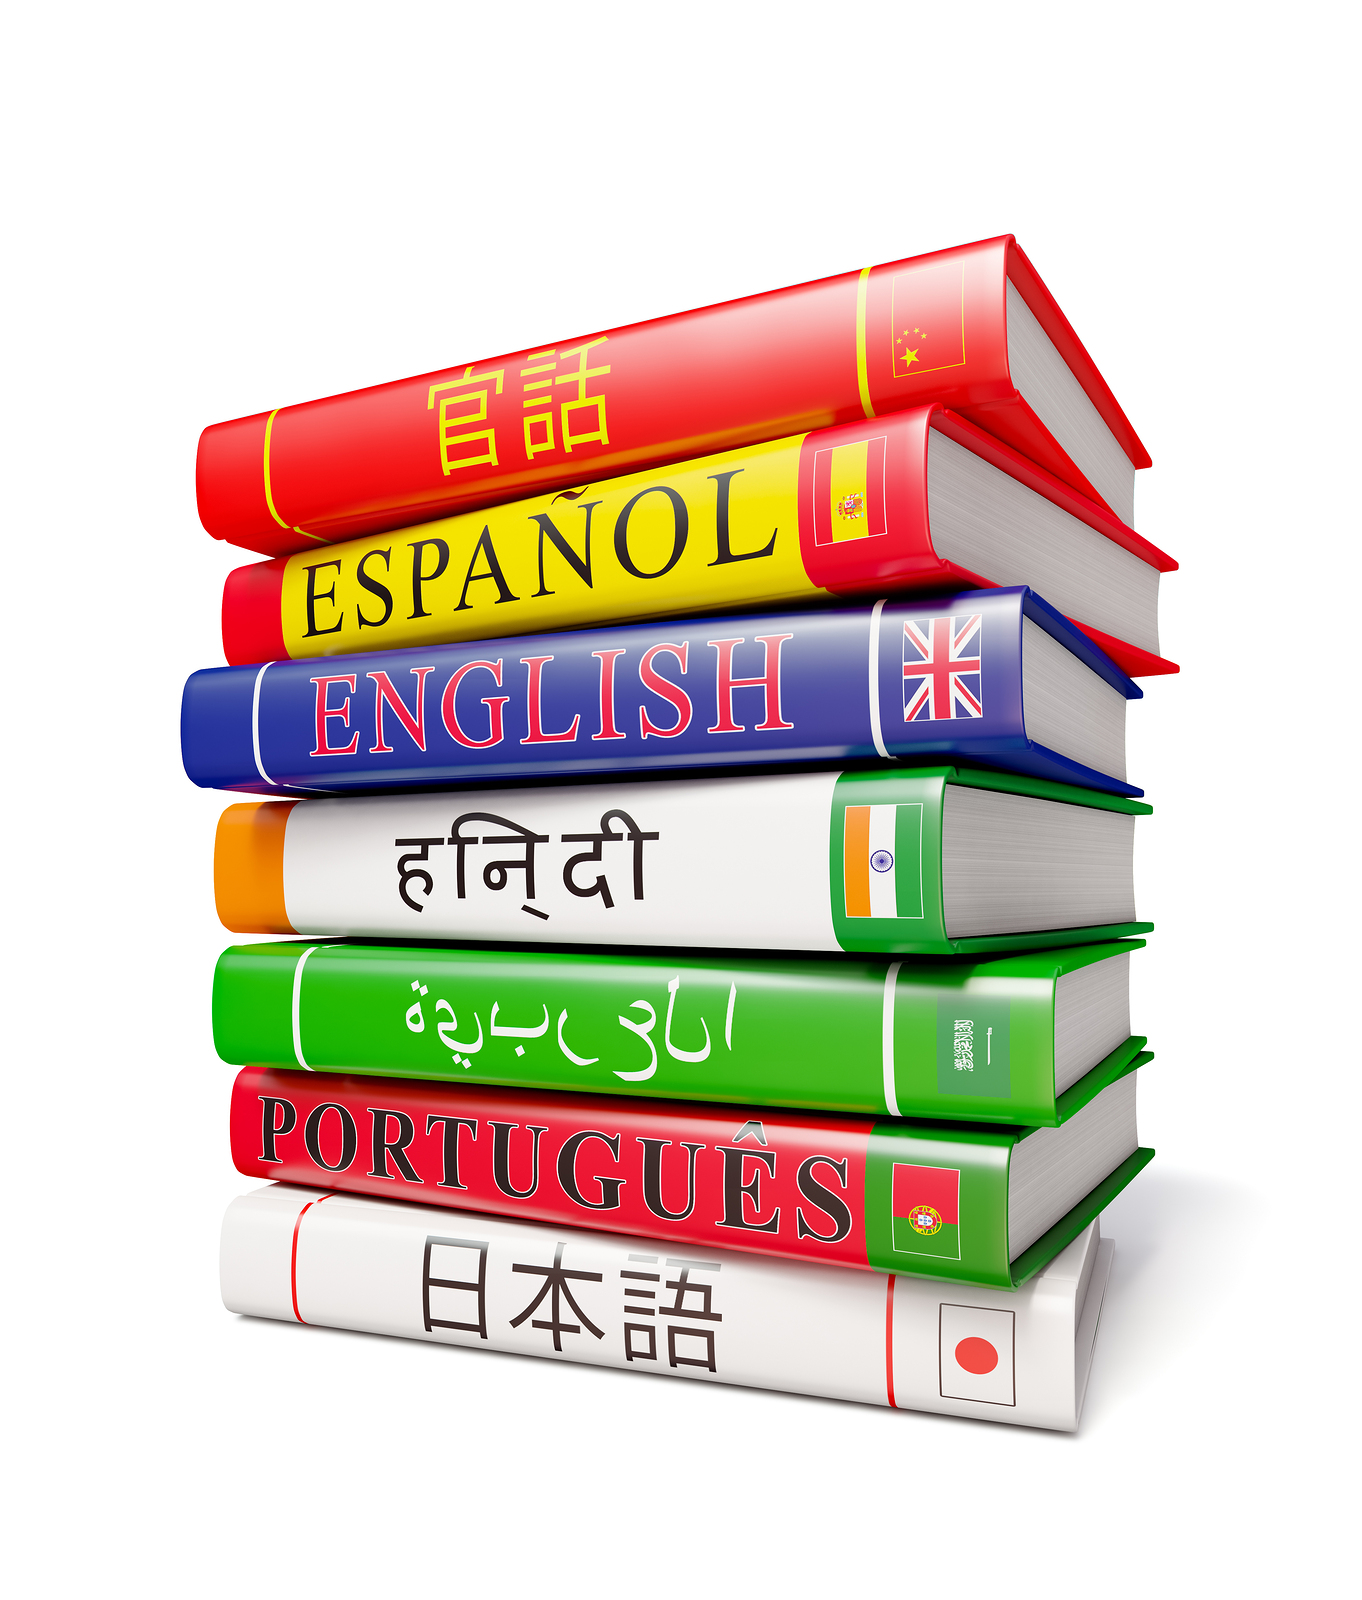 Fun fact: Over 350 different language--other than English--are spoken throughout U.S. homes.